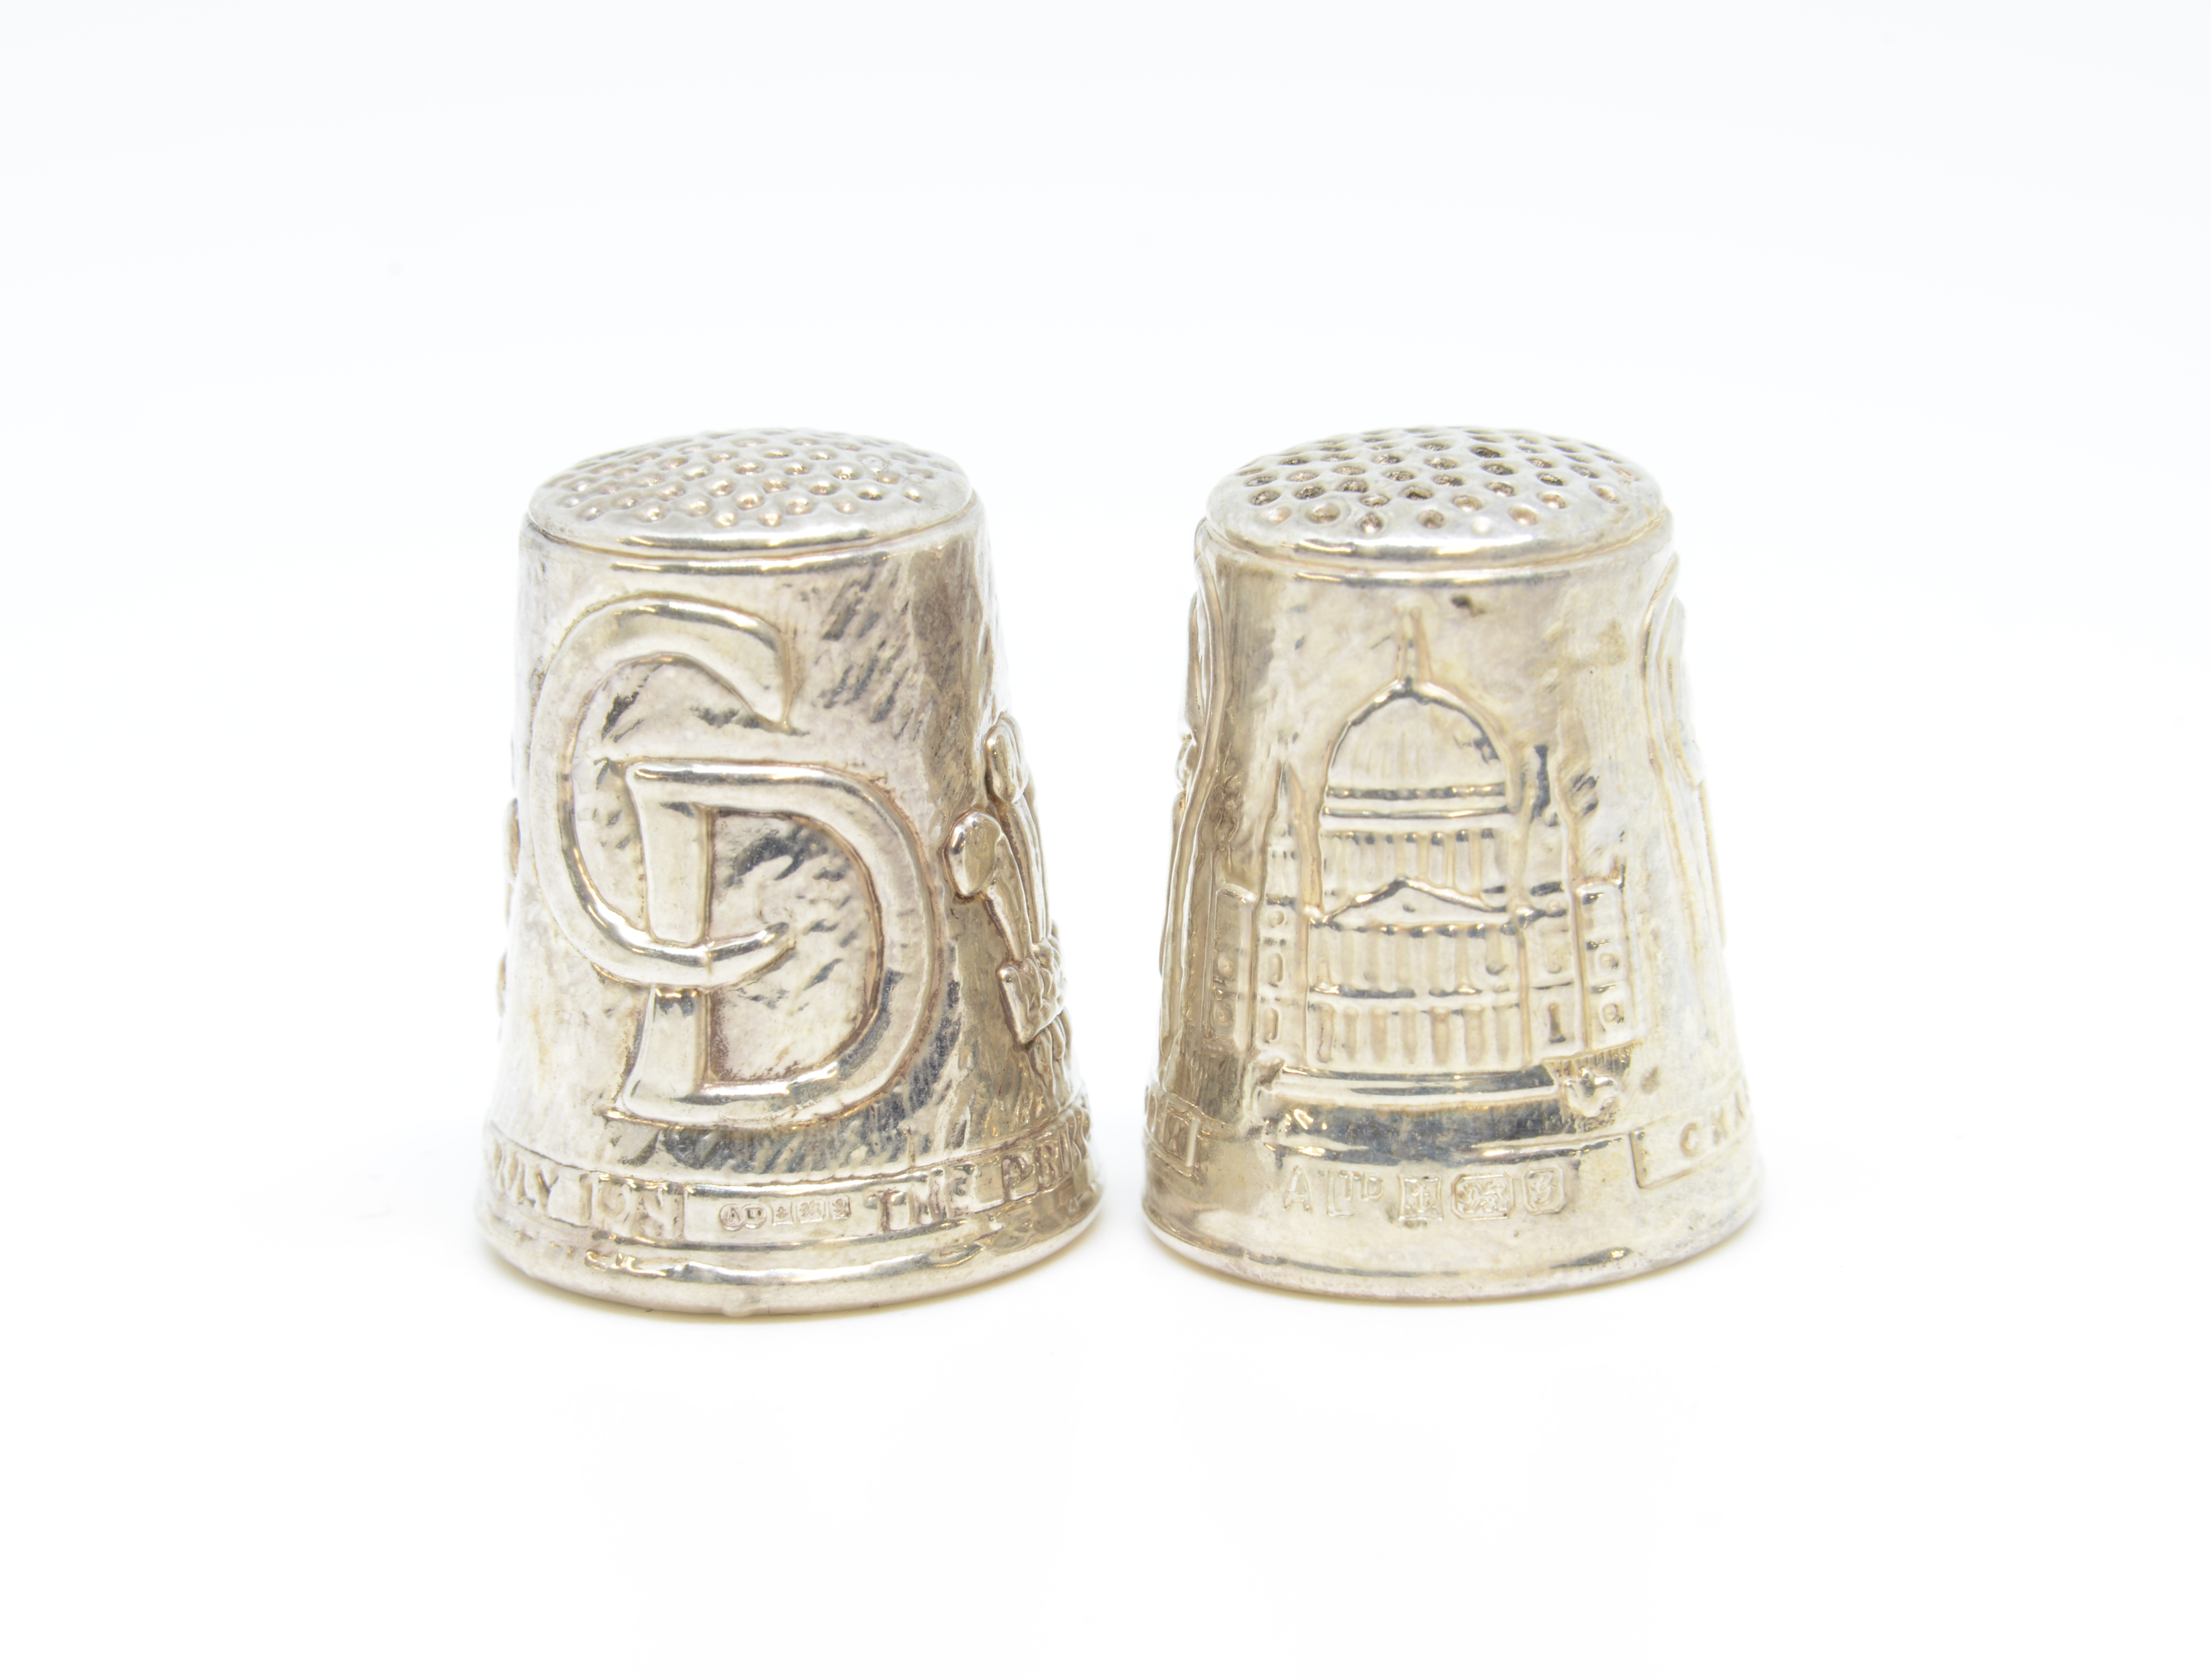 A pair of modern silver 'The Heritage Collection' thimbles.